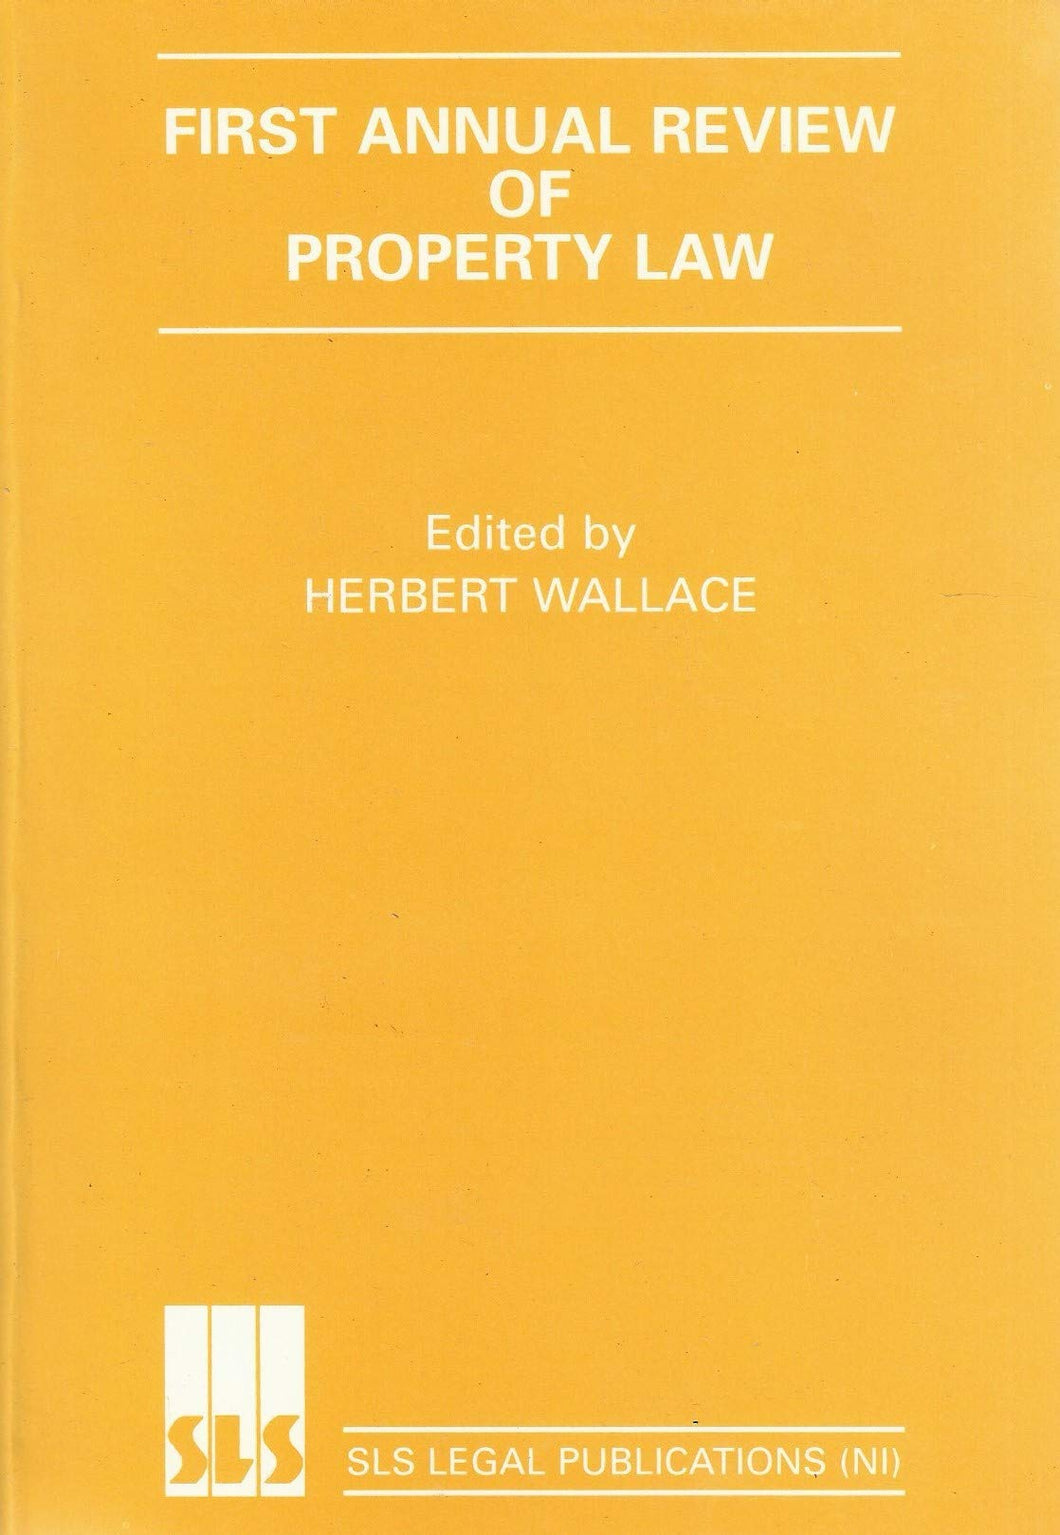 First Annual Review of Property Law (Servicing the legal system programme)